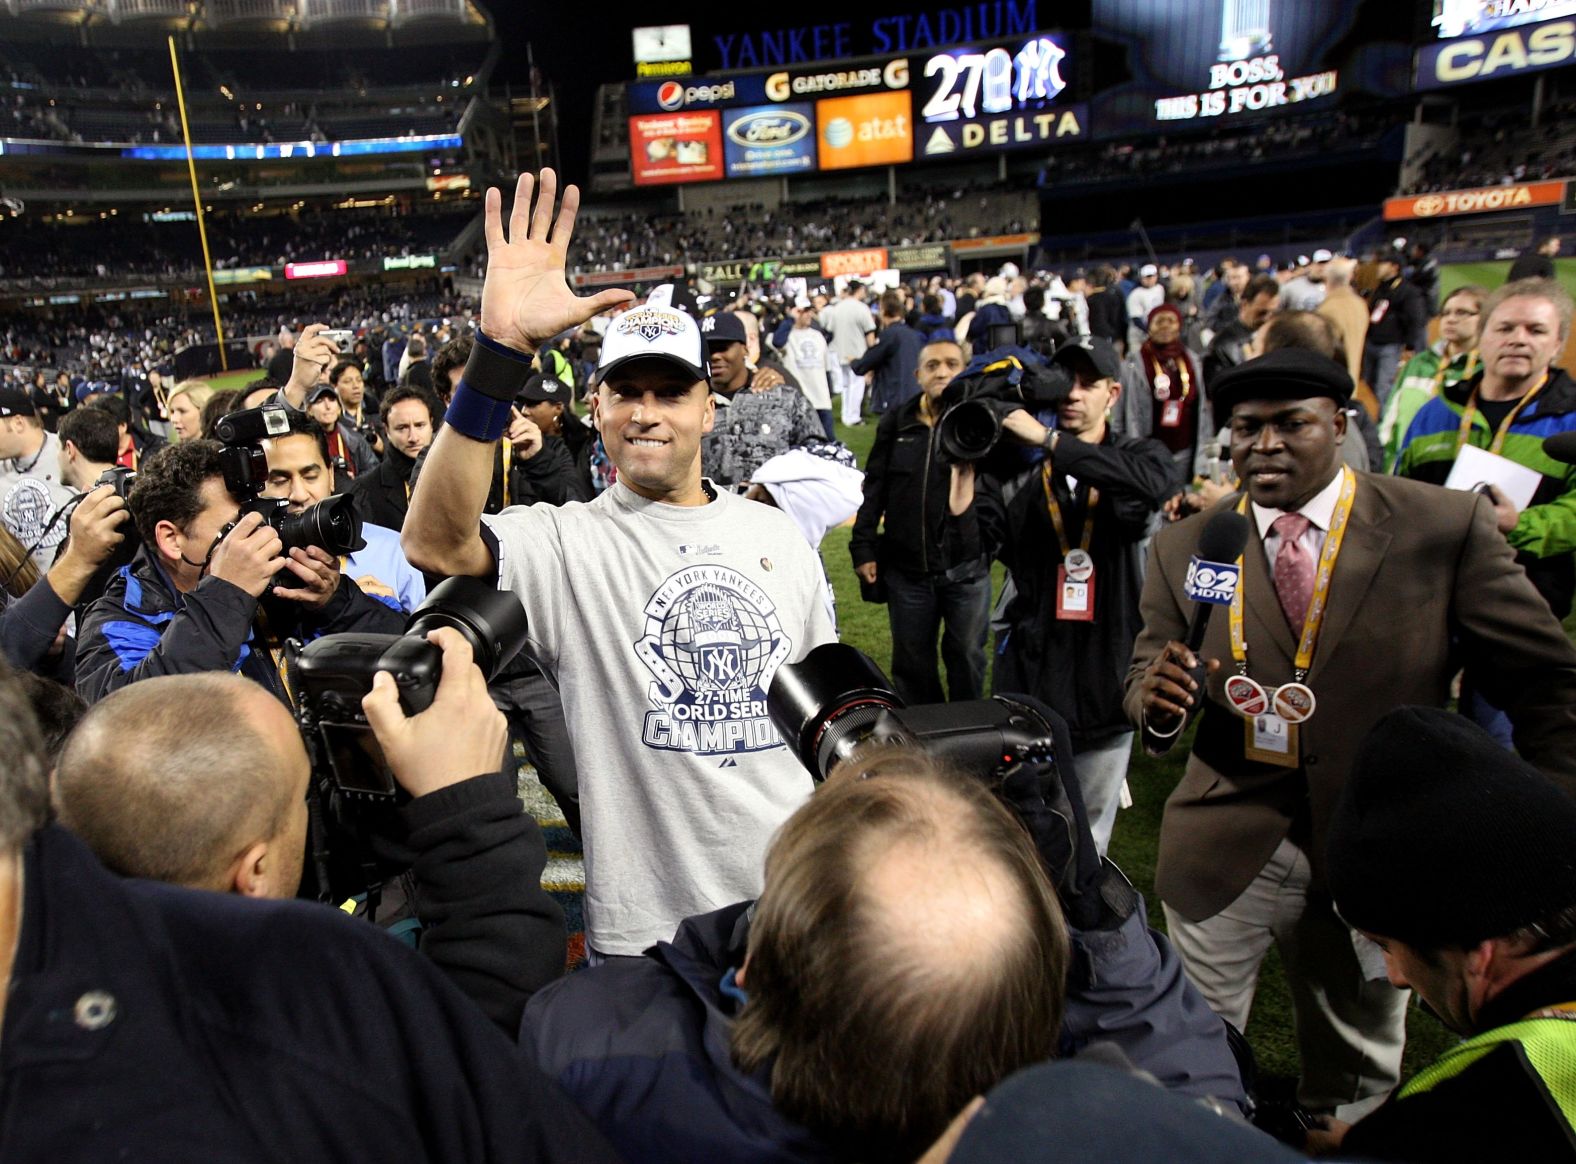 Jeter celebrates on the field after the Yankees won the 2009 World Series in New York. As Jeter's hand shows, this was his fifth world title with the Yankees.